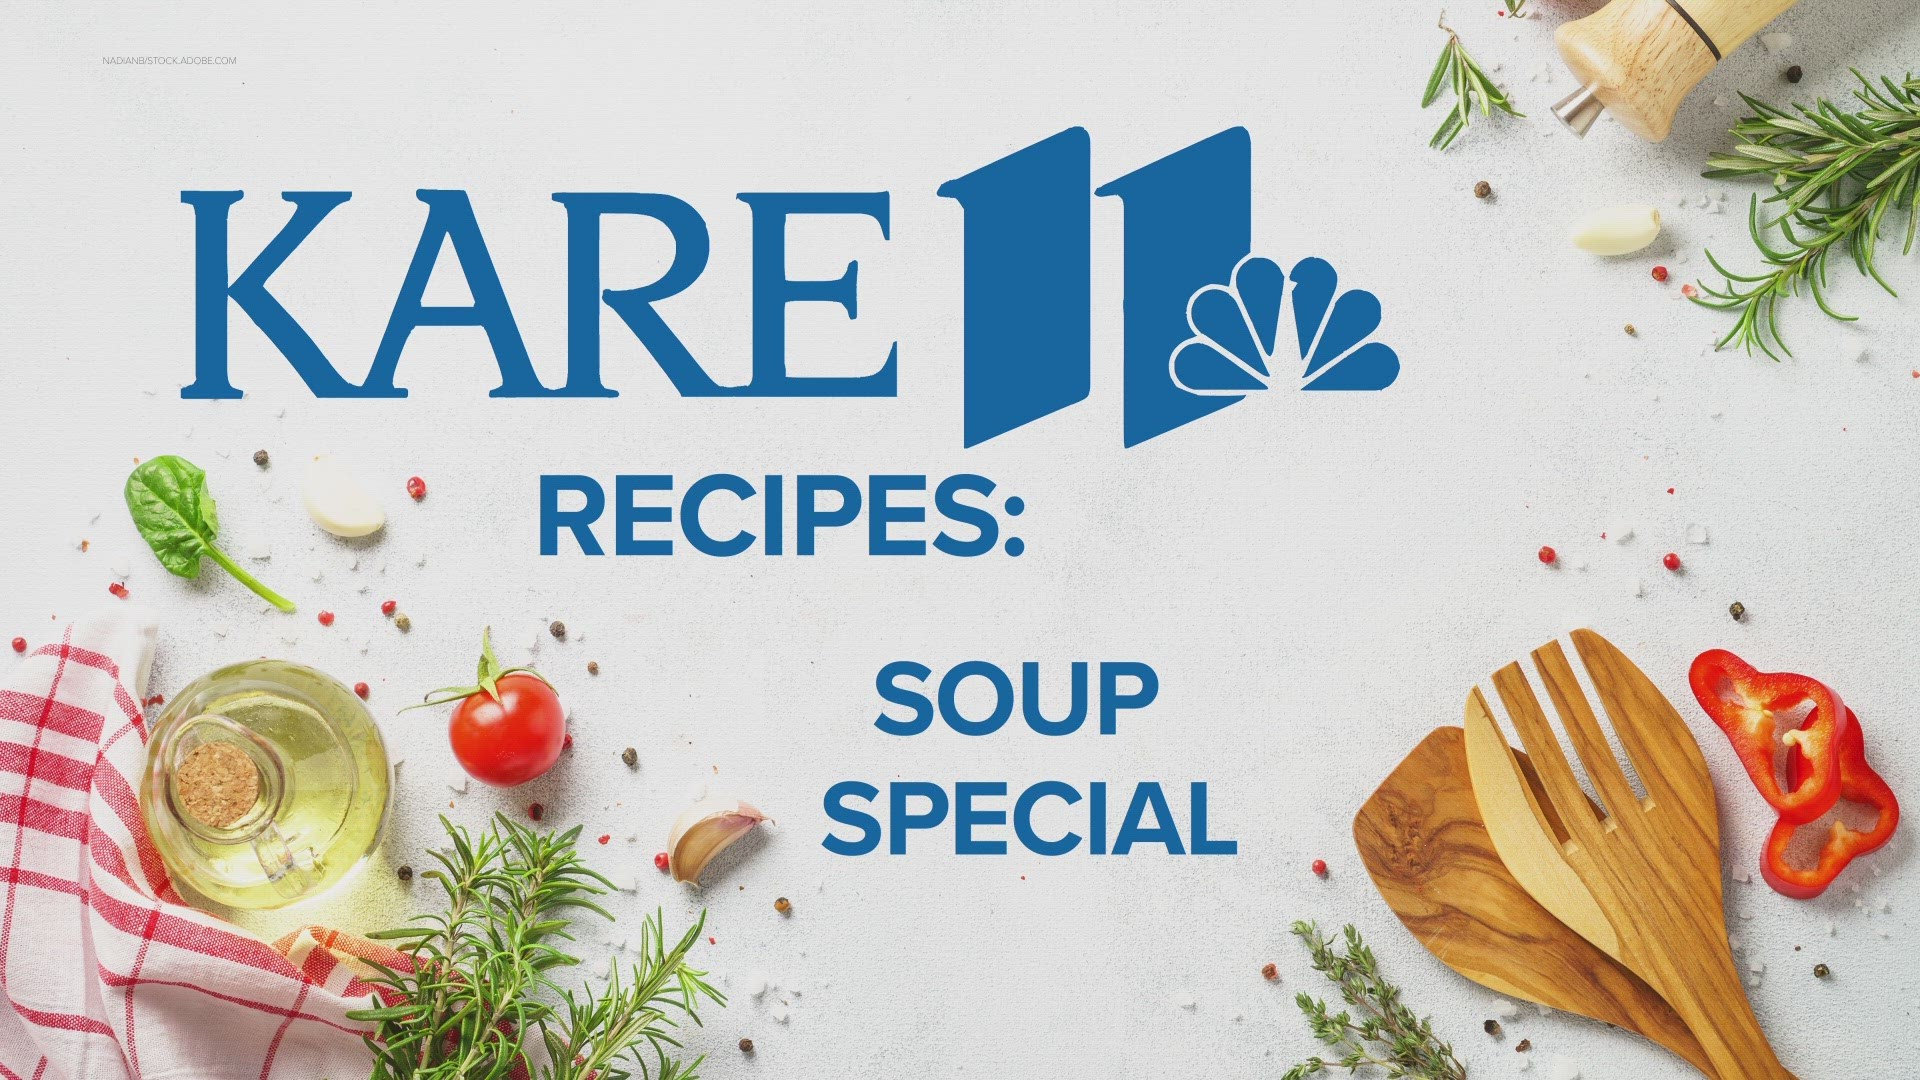 Here is a collection of recipes from KARE 11 to keep you warm all through the Minnesota winters.